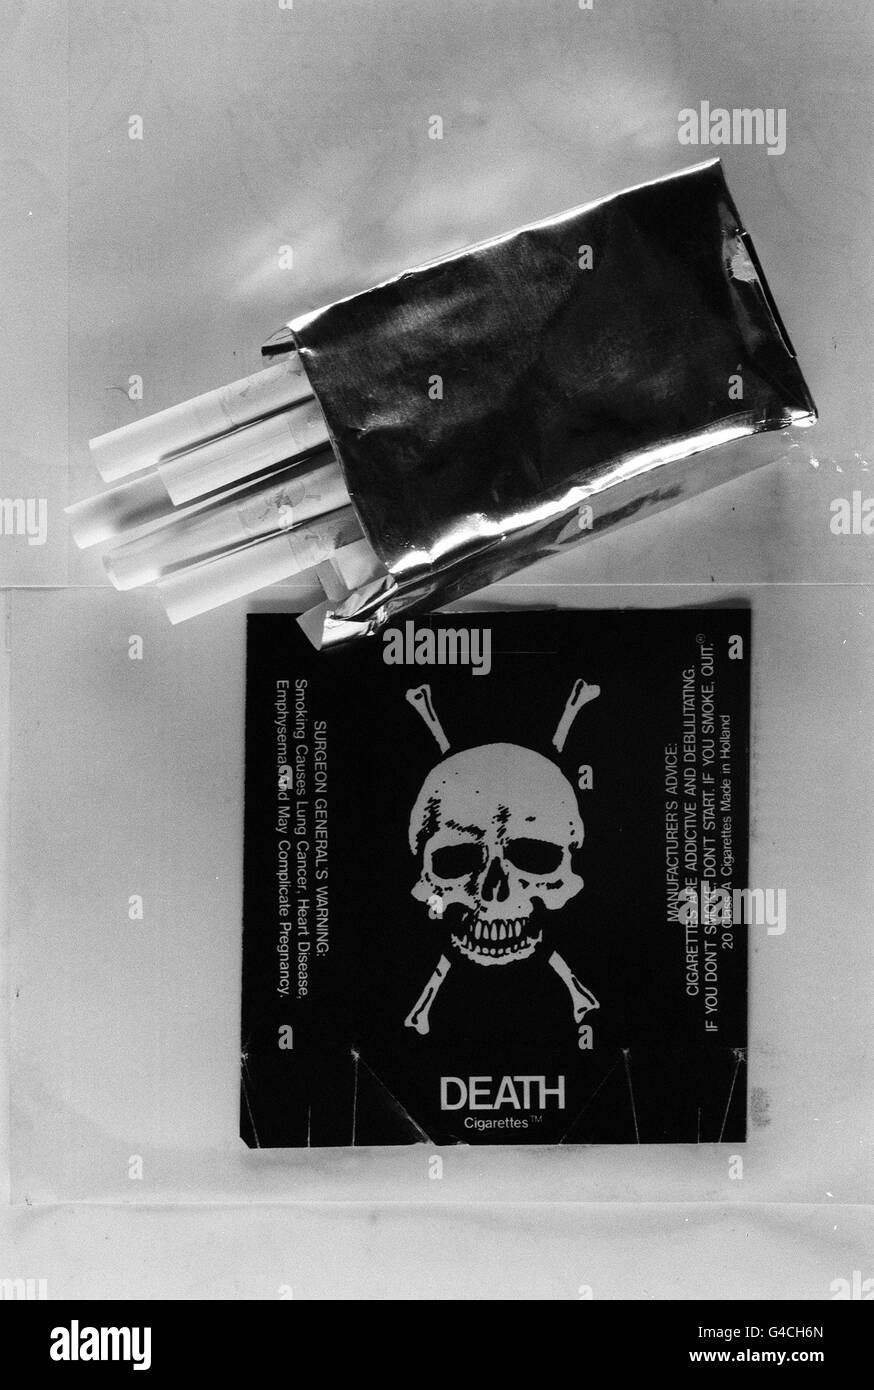 PA NEWS PHOTO 18/12/91 A NEW BRAND OF CIGARETTES CALLED 'DEATH' Stock Photo